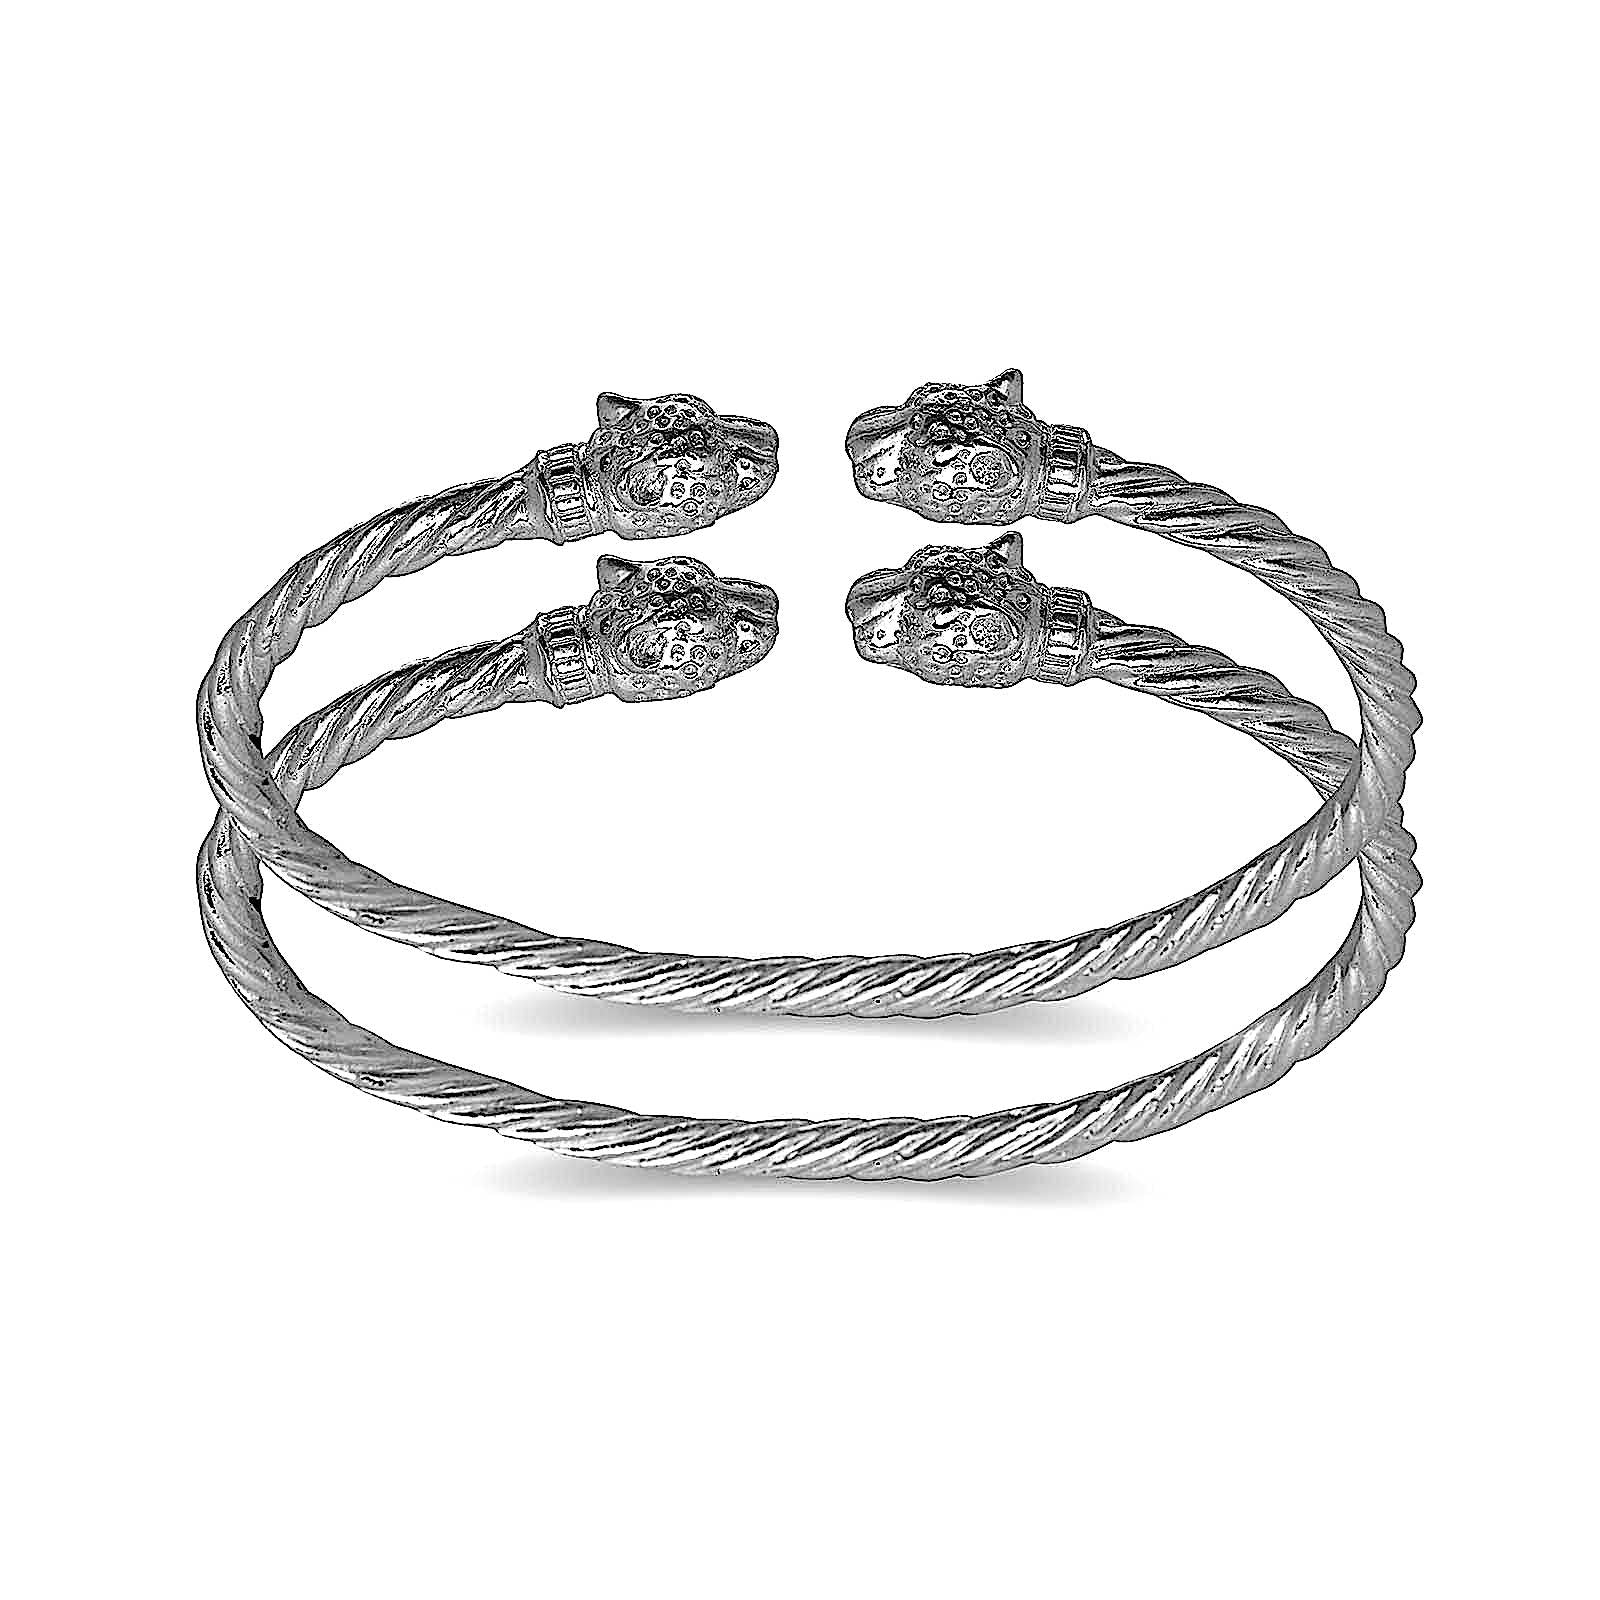 Jaguar head coiled rope West Indian bangle .925 Sterling silver MADE IN USA (pair) - Betterjewelry